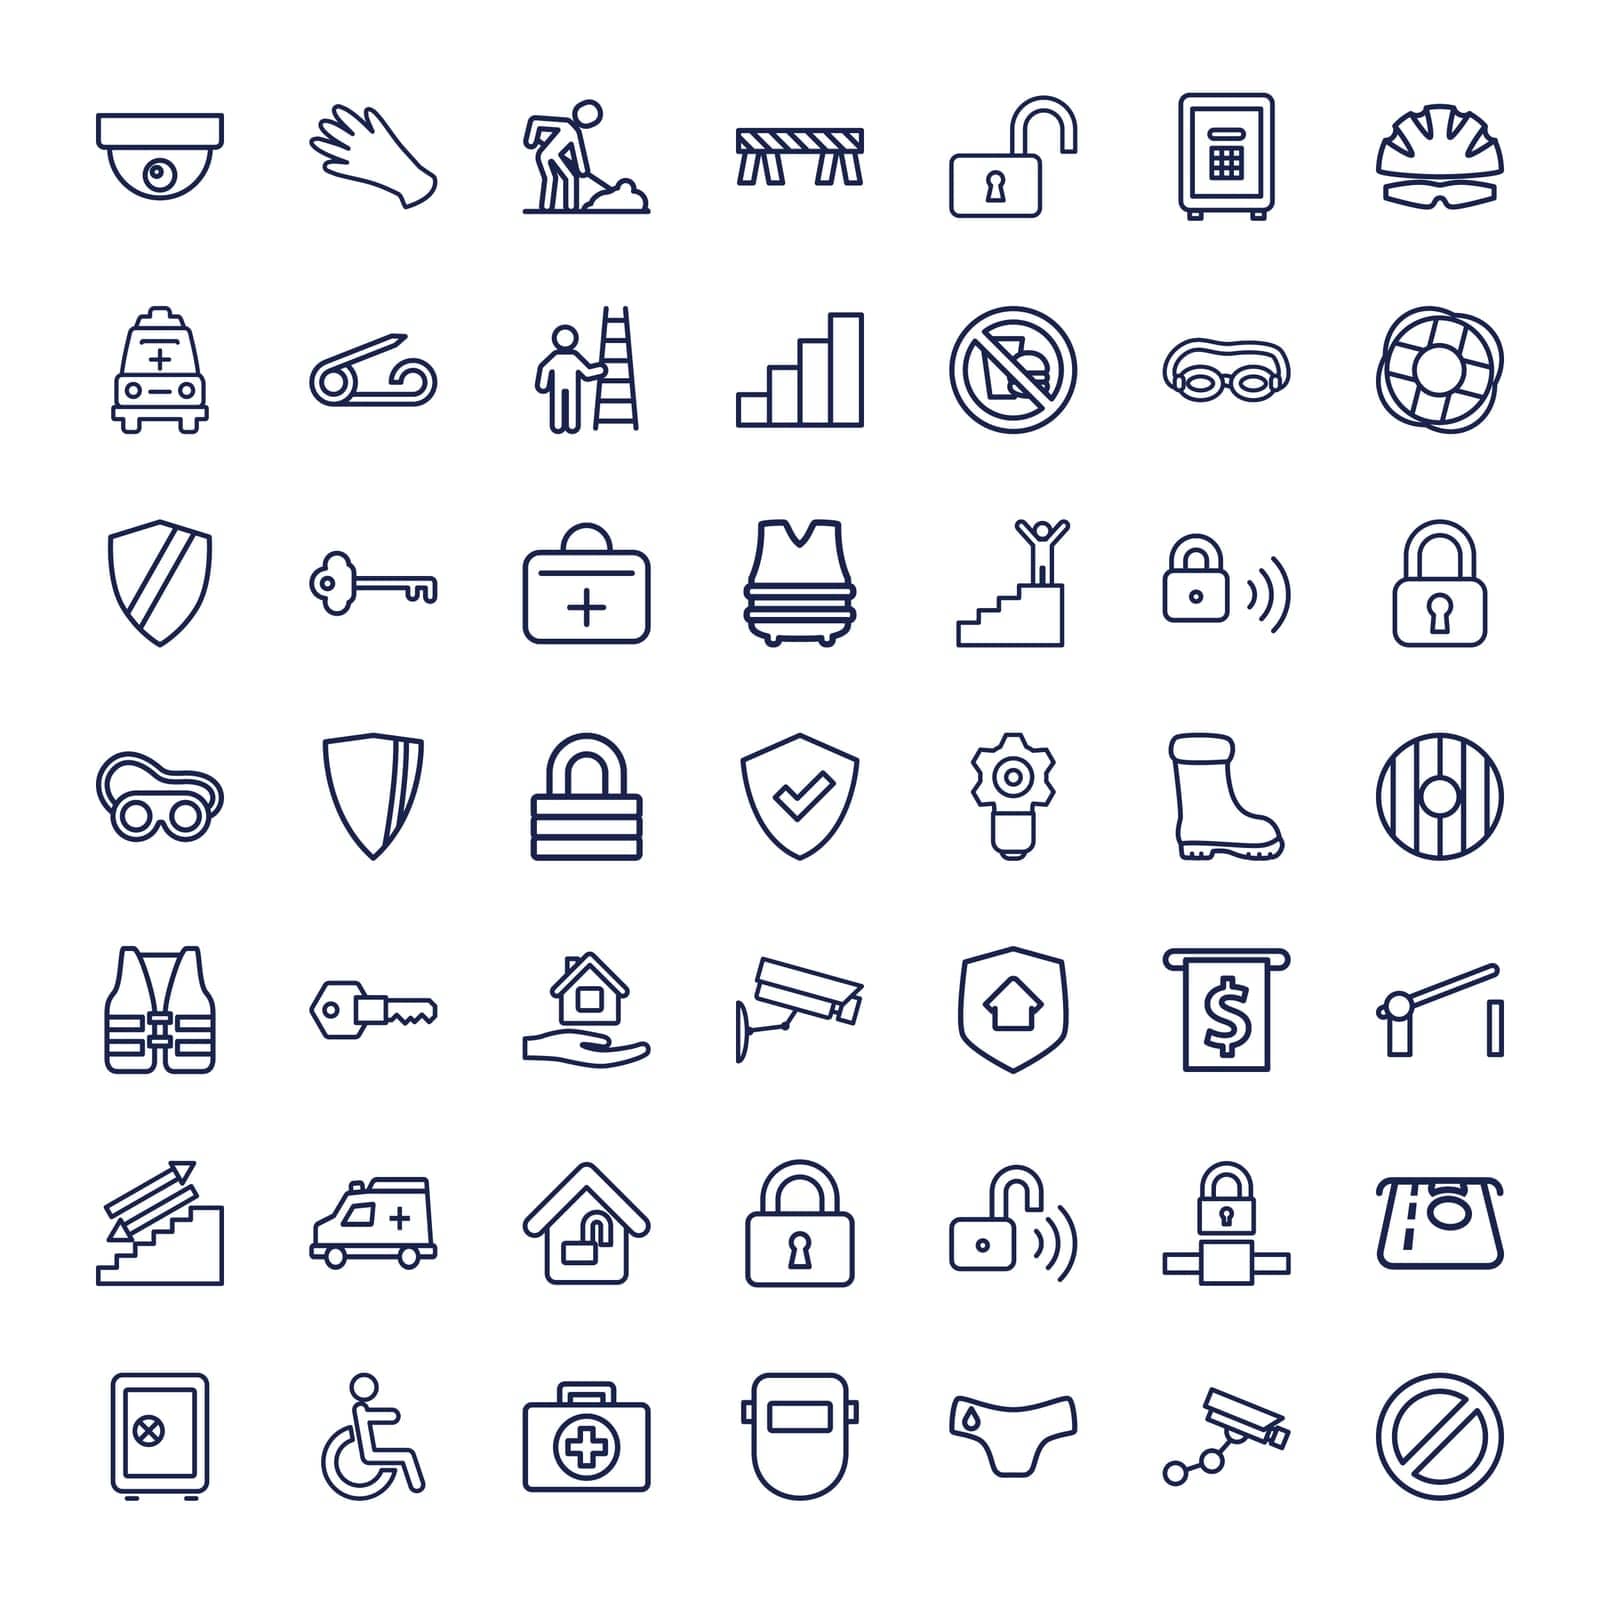 shield,panties,stairs,icon,life,security,barrier,children,safety,lock,disabled,vector,atm,camera,boot,key,mask,welder,set,in,vest,opened,ambulance,icons,home,keyhole,money,prohibited,safe,aid,first,care,gear,withdraw by ogqcorp